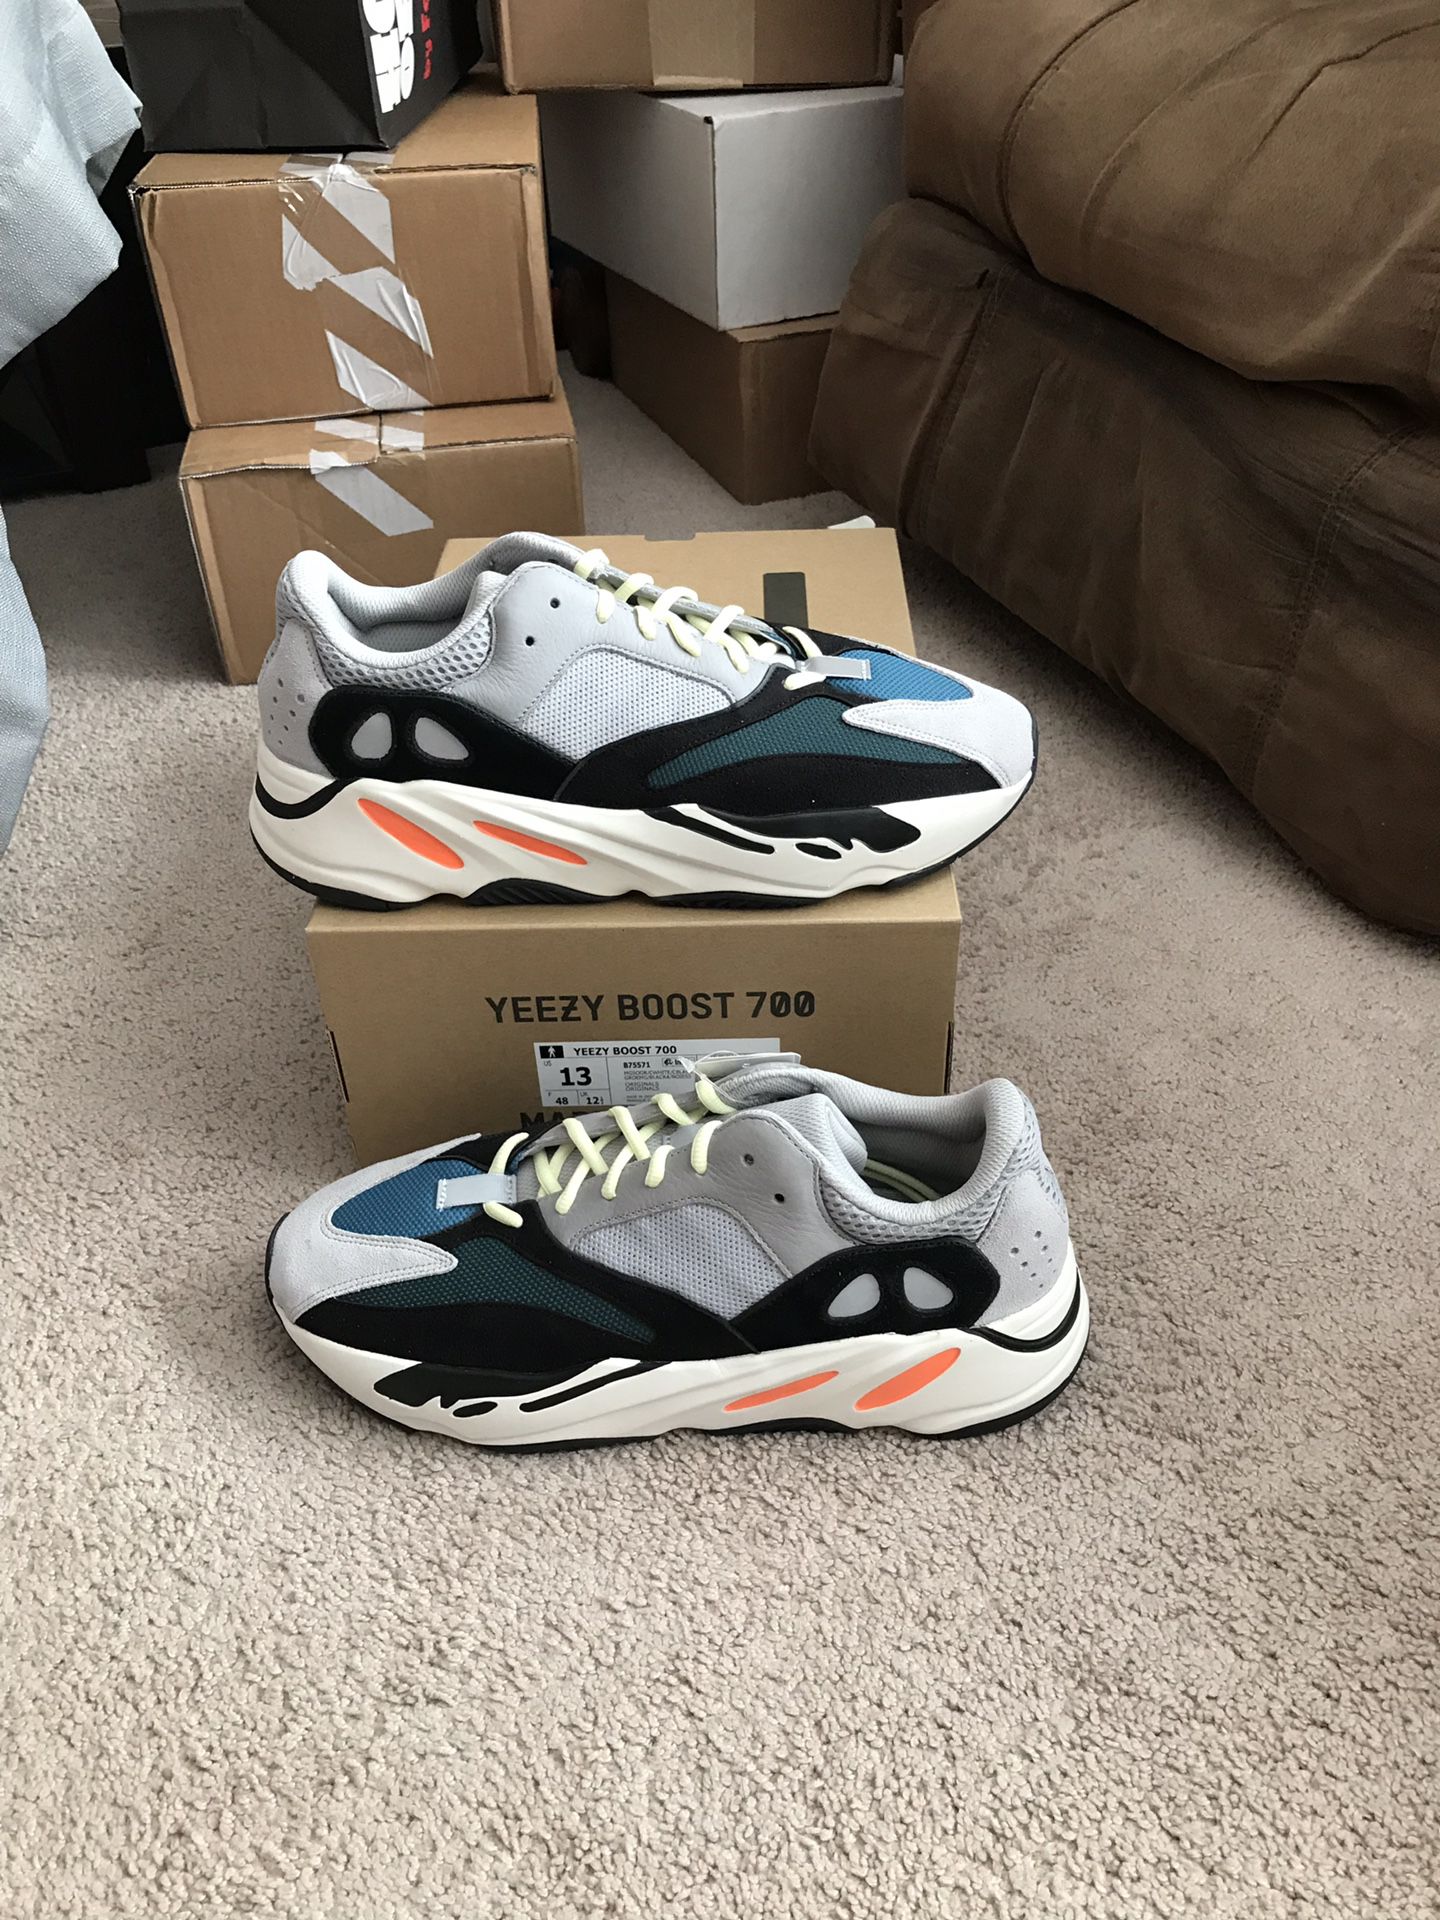 Yeezy Boost 700 Wave Runners size 13